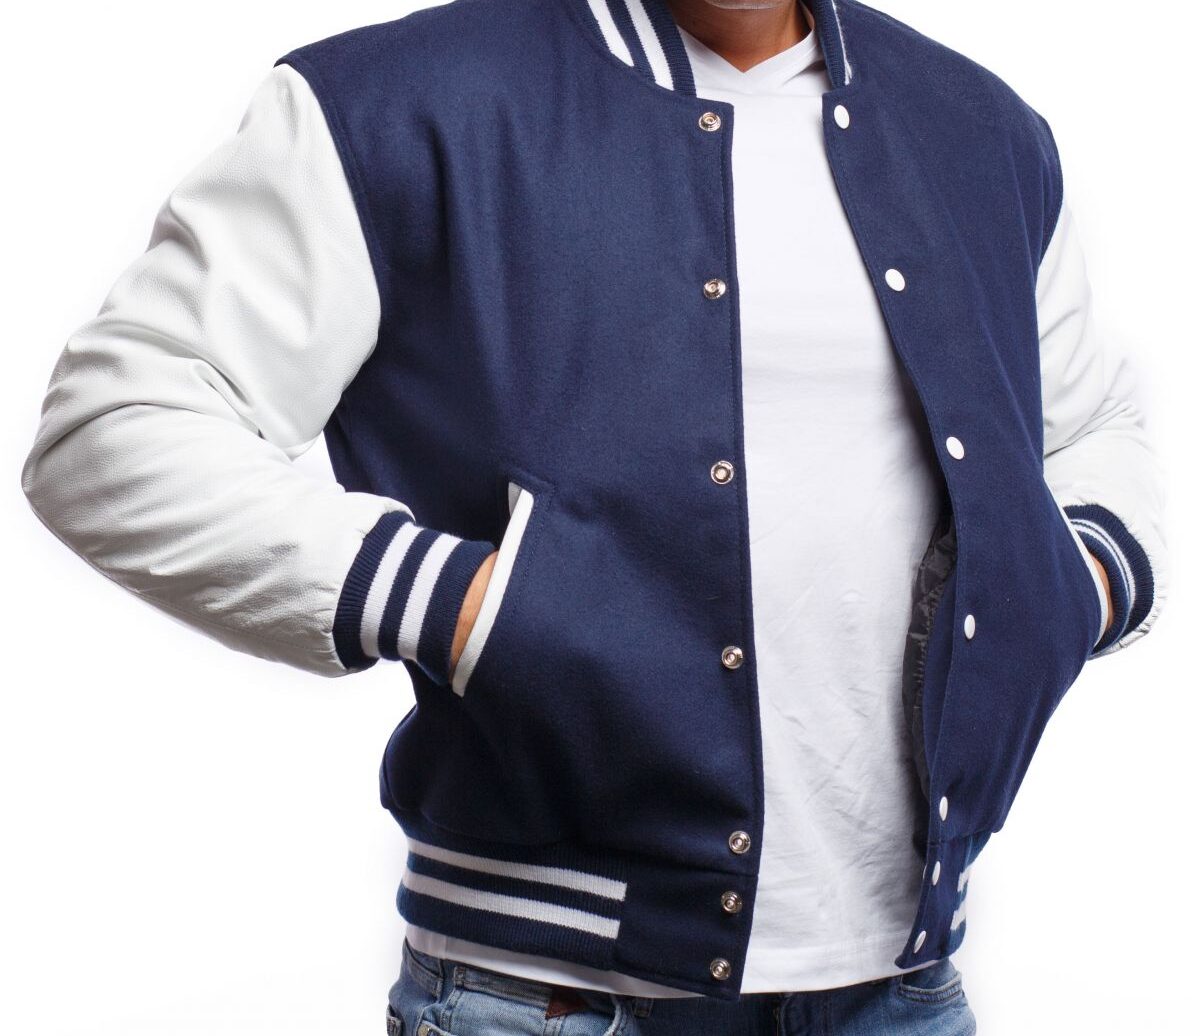 Varsity Jacket with Royal Blue Wool Body & Bright White Leather Sleeves ...